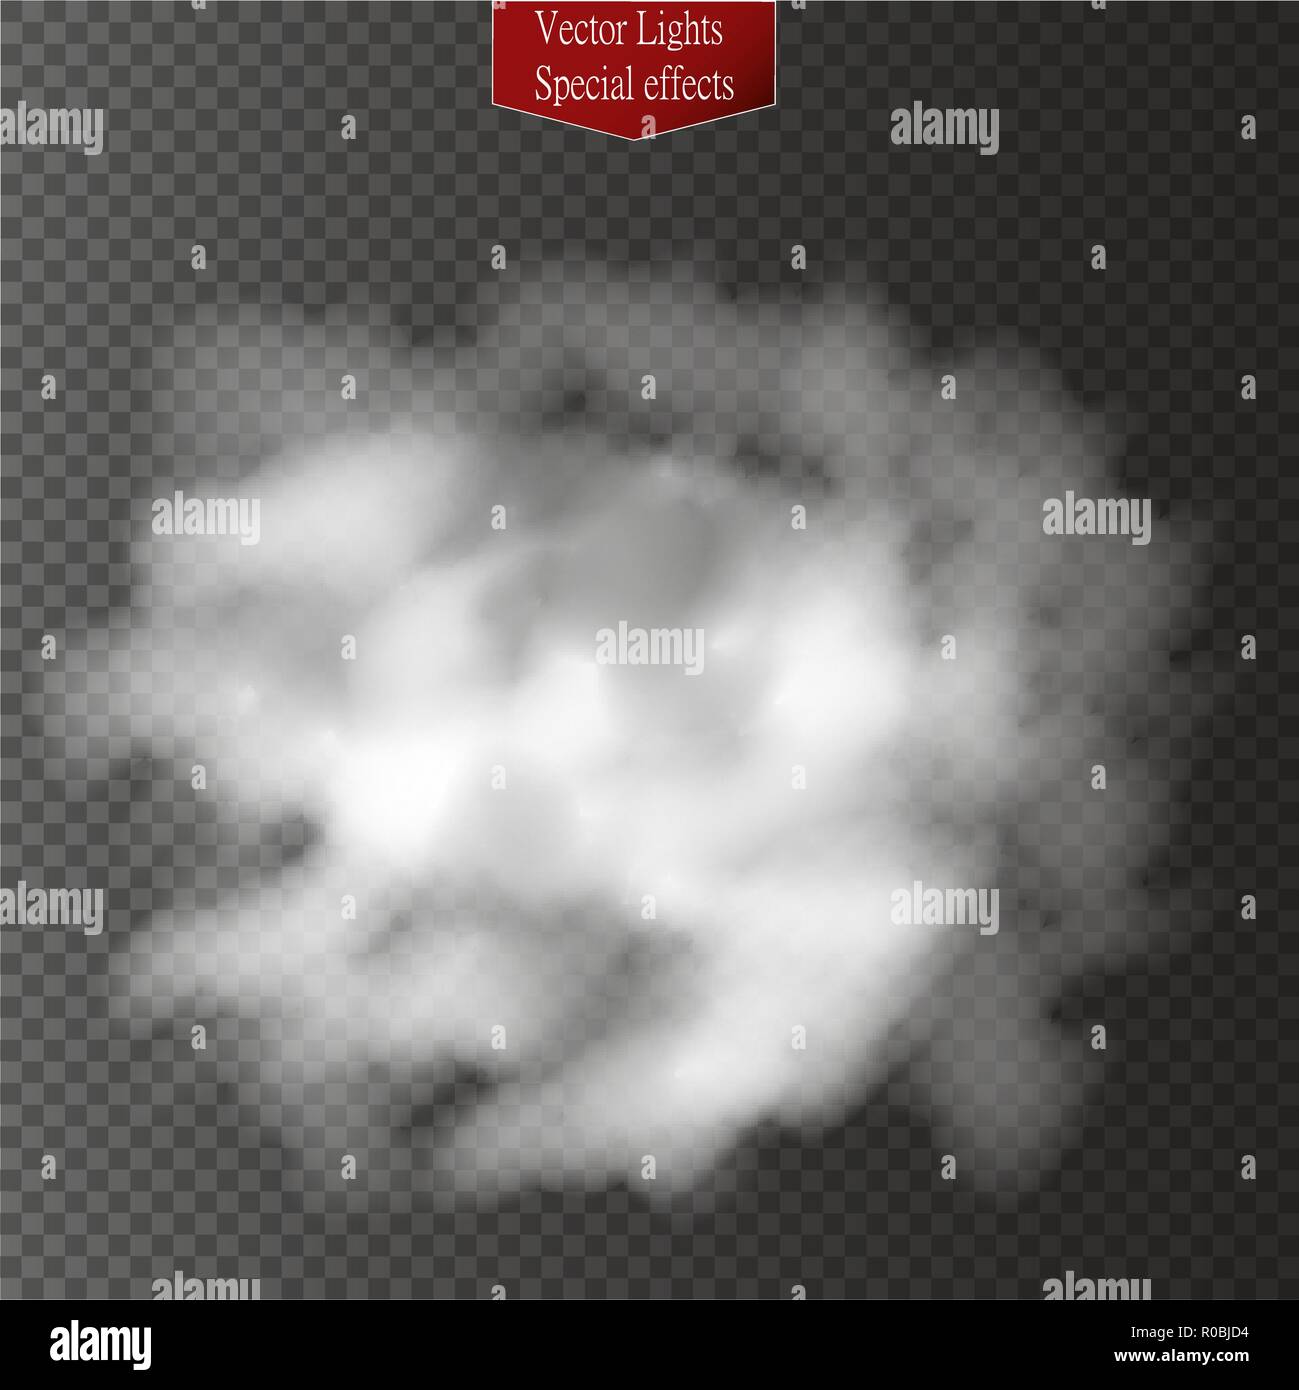 Fog or smoke isolated transparent special effect. White vector cloudiness, mist or smog background. Vector illustration Stock Vector